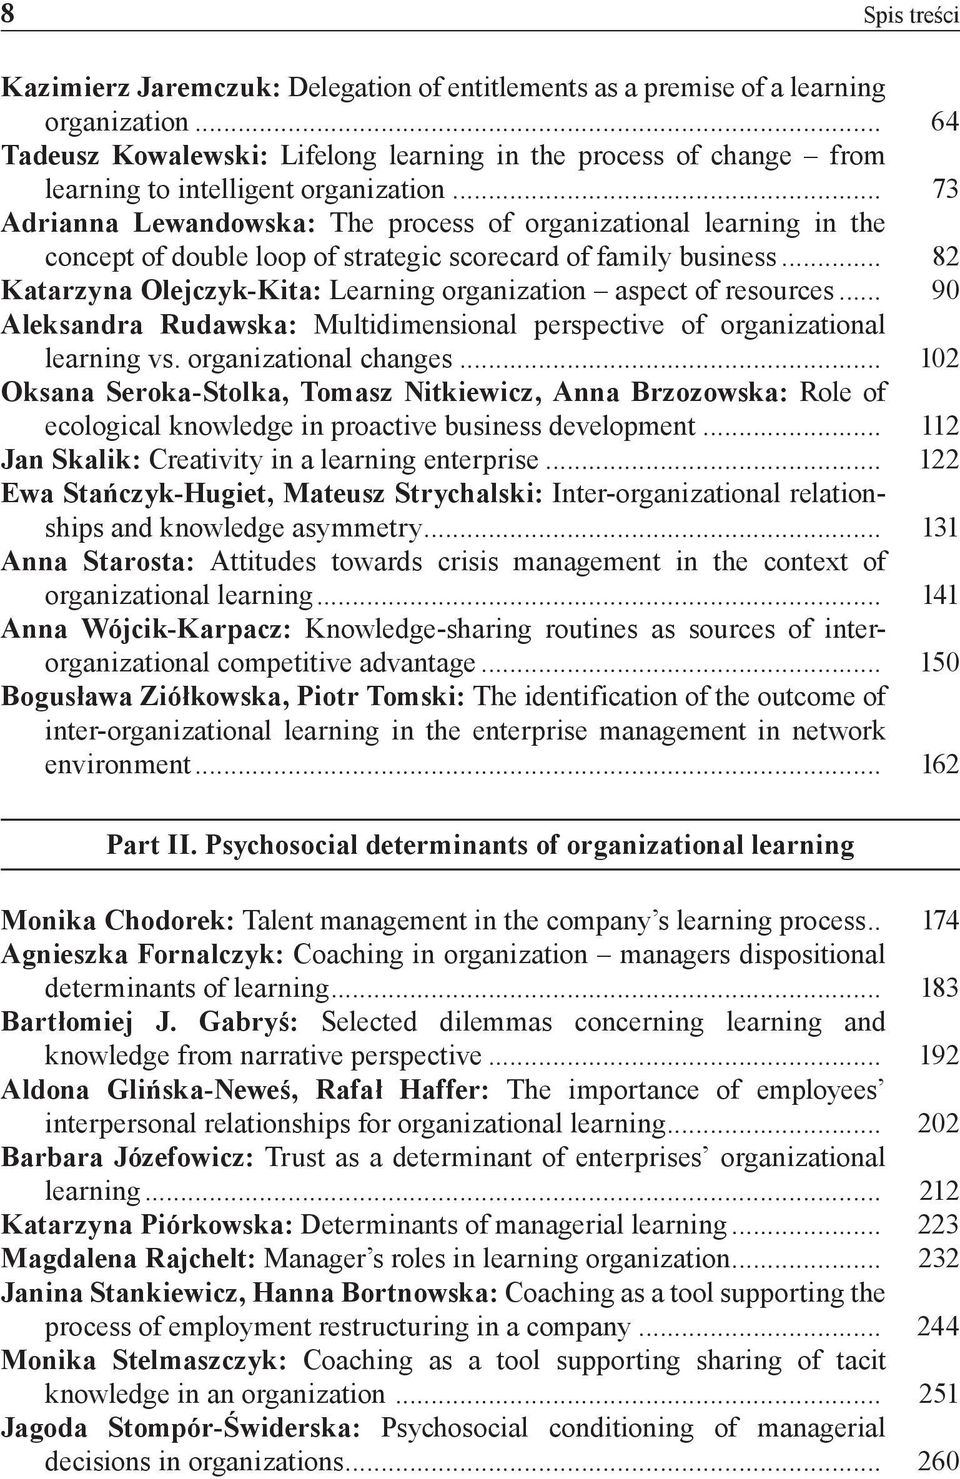 .. 73 Adrianna Lewandowska: The process of organizational learning in the concept of double loop of strategic scorecard of family business.